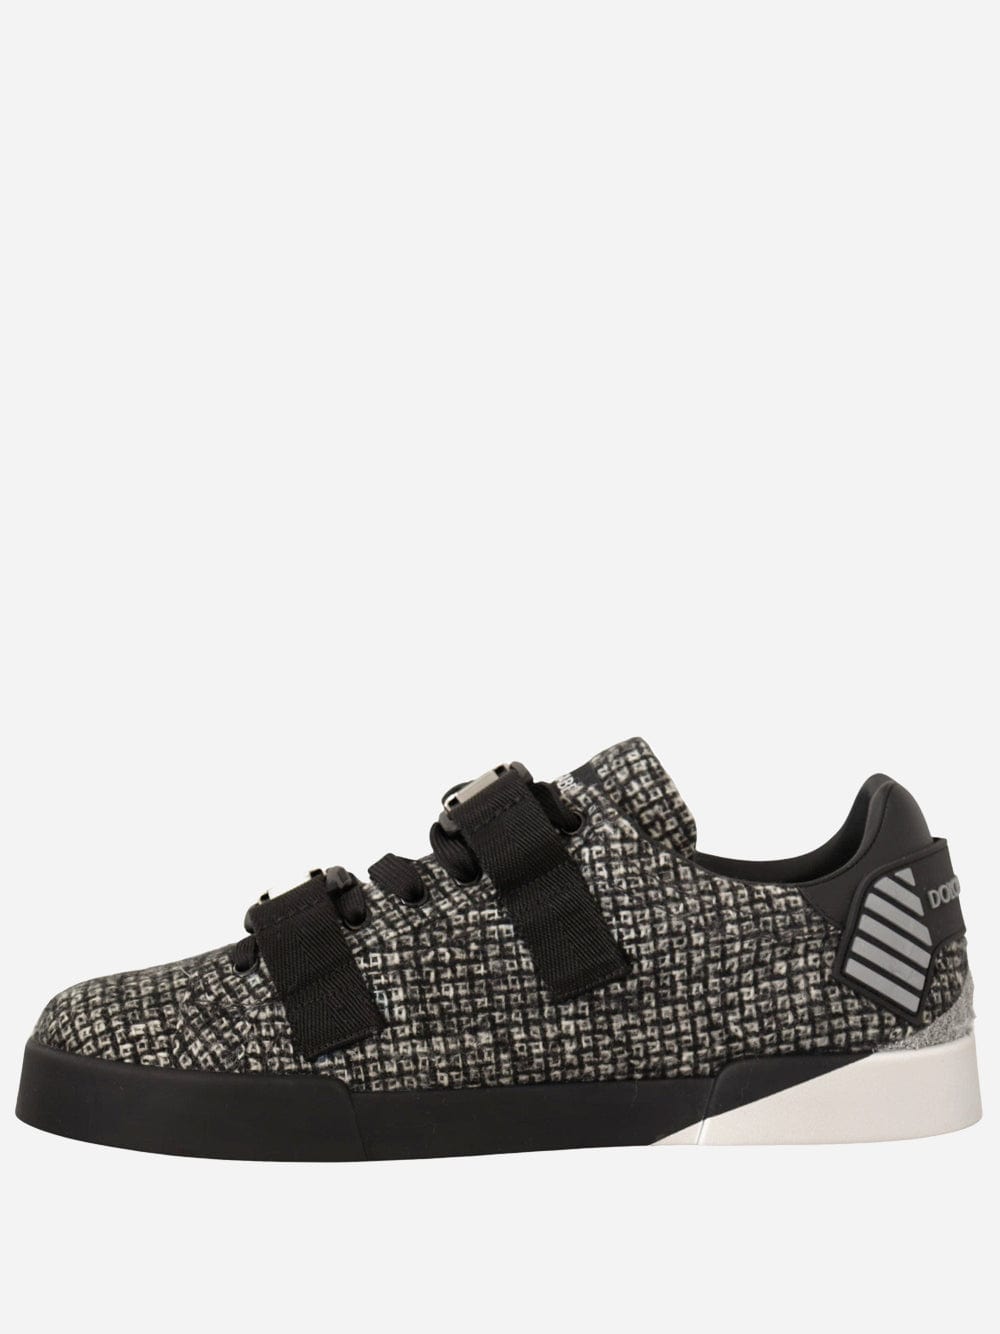 Dolce & Gabbana Logo Strapped Plaid Sneakers